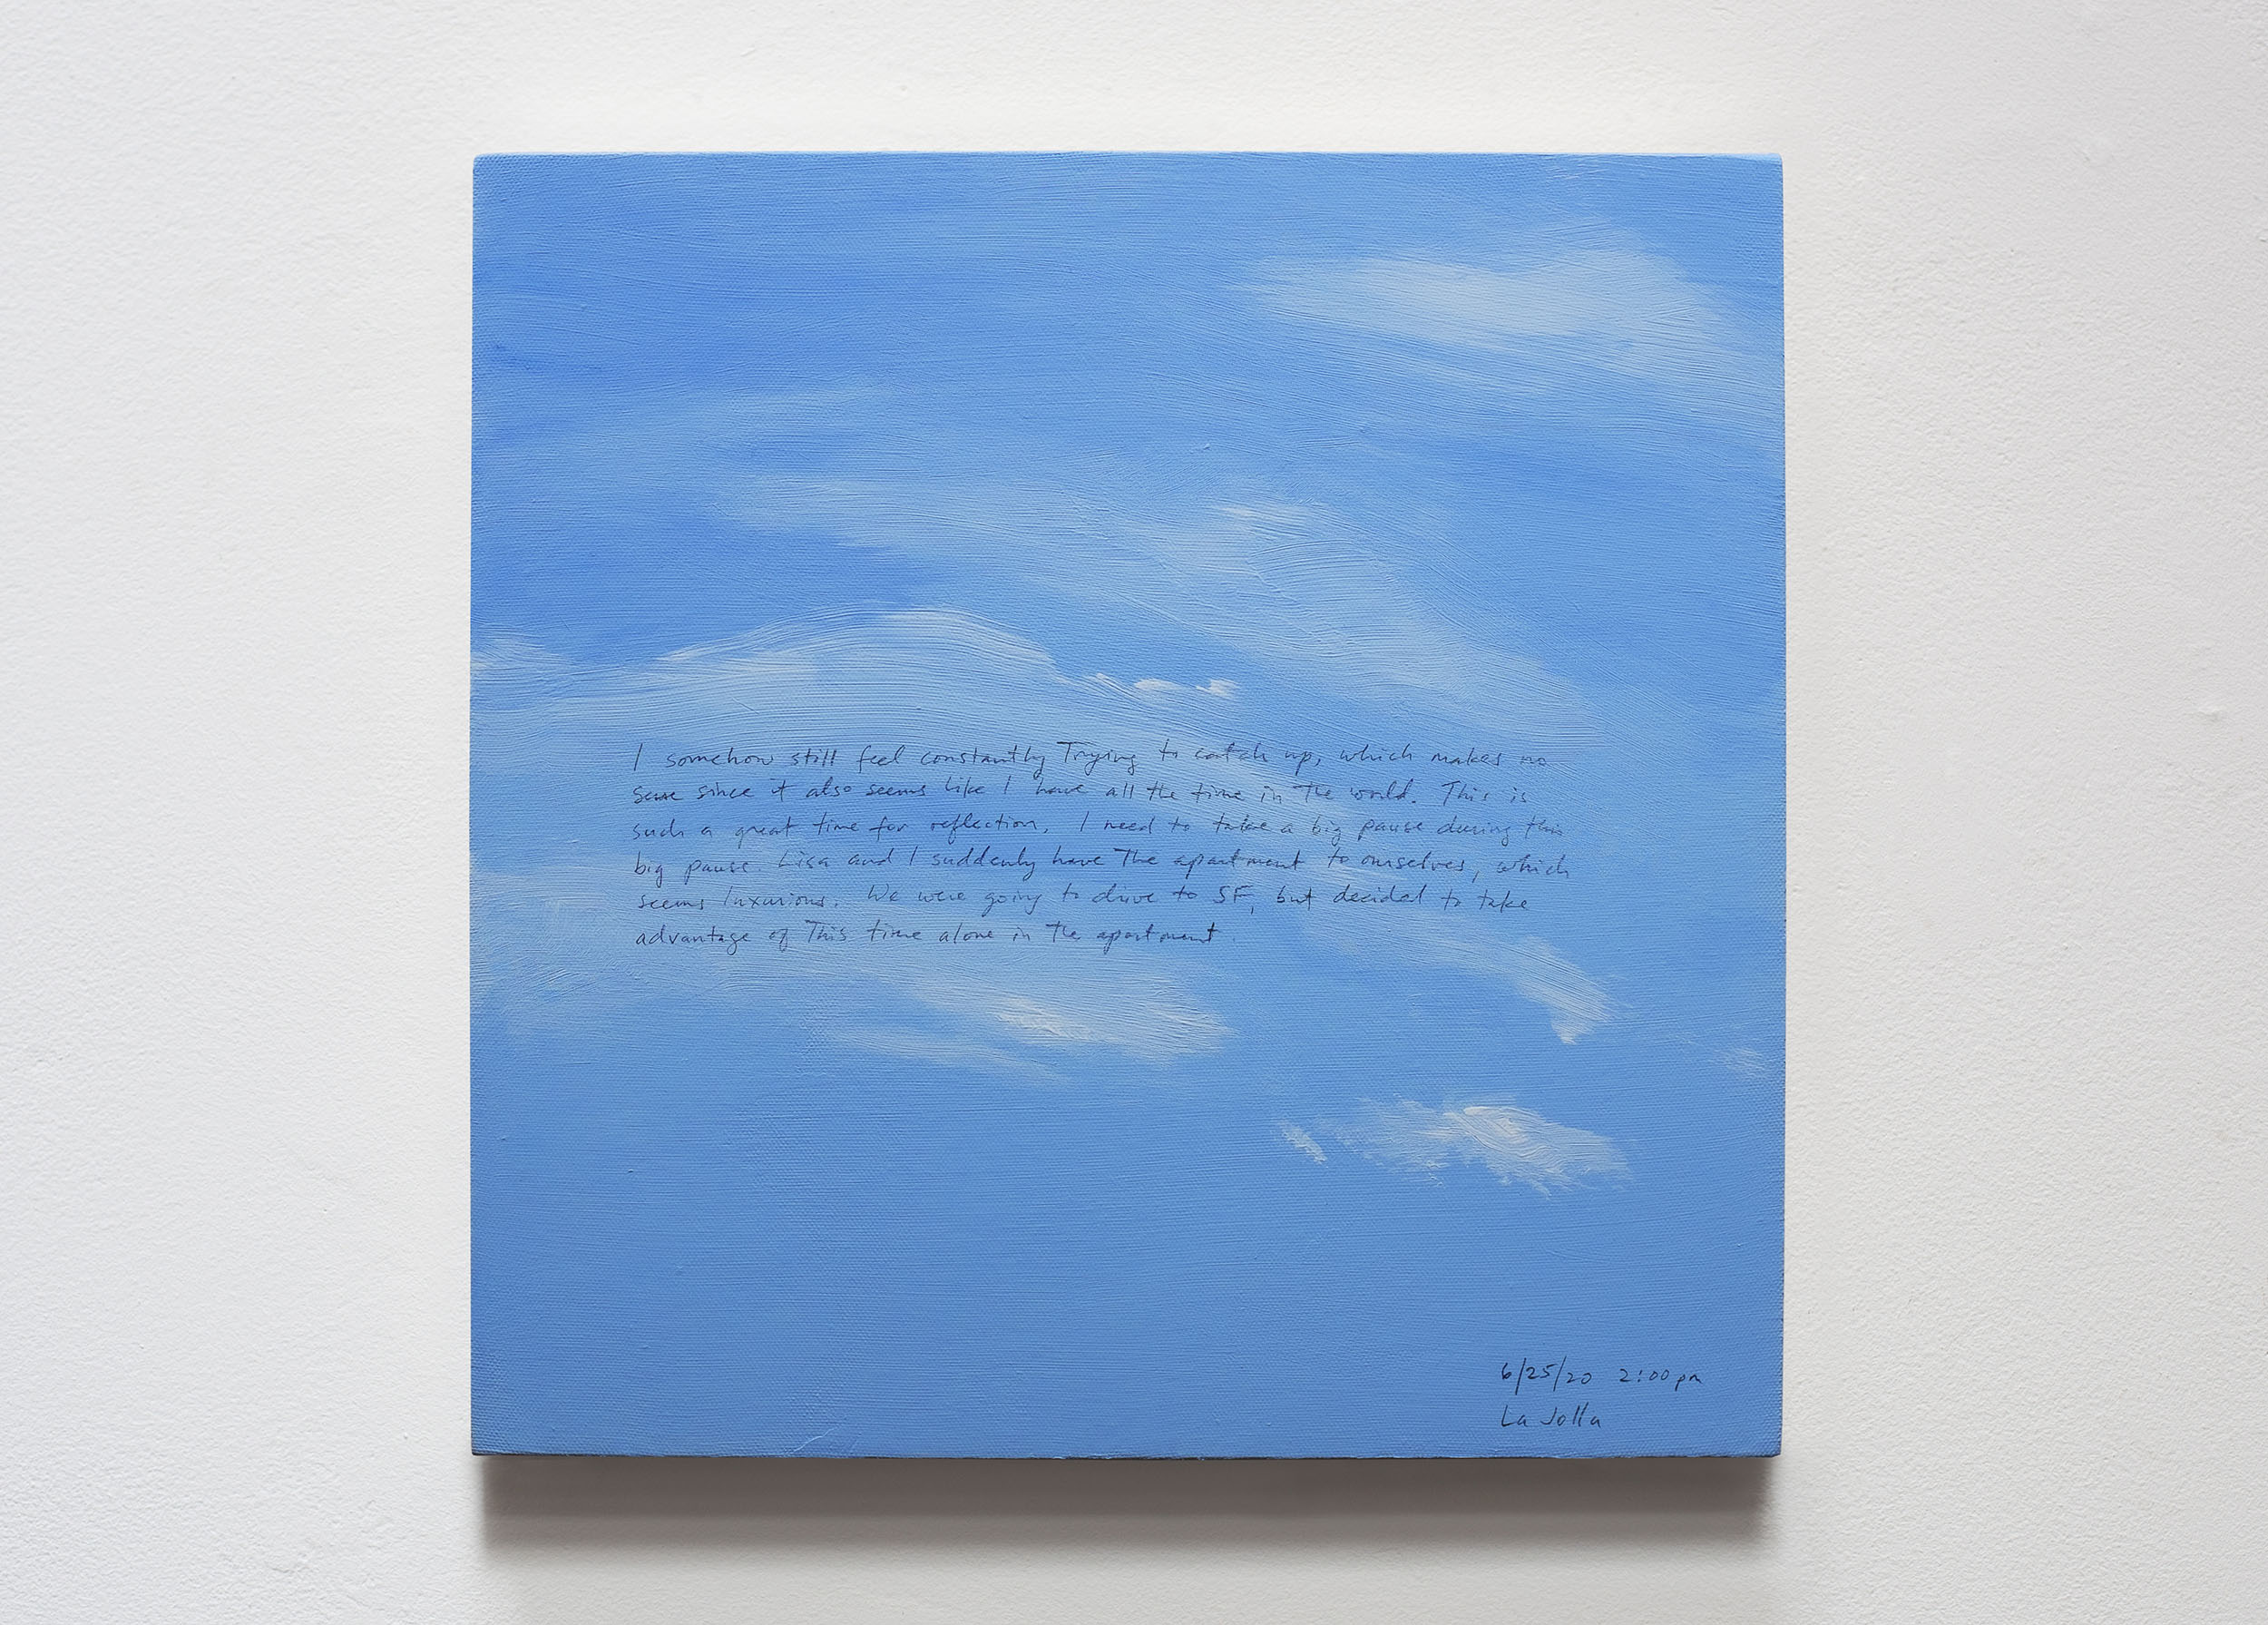 A 14 × 14 inch, acrylic painting of the sky. A journal entry is handwritten on the painting:

“I somehow still feel constantly trying to catch up, which makes no sense since it also seems like I have all the time in the world. This is such a great time for reflection. I need to take a big pause during this big pause. Lisa and I suddenly have the apartment to ourselves, which seems luxurious. We were going to drive to SF, but decided to take advantage of this time alone in the apartment.

6/25/20 2:00 pm
La Jolla”